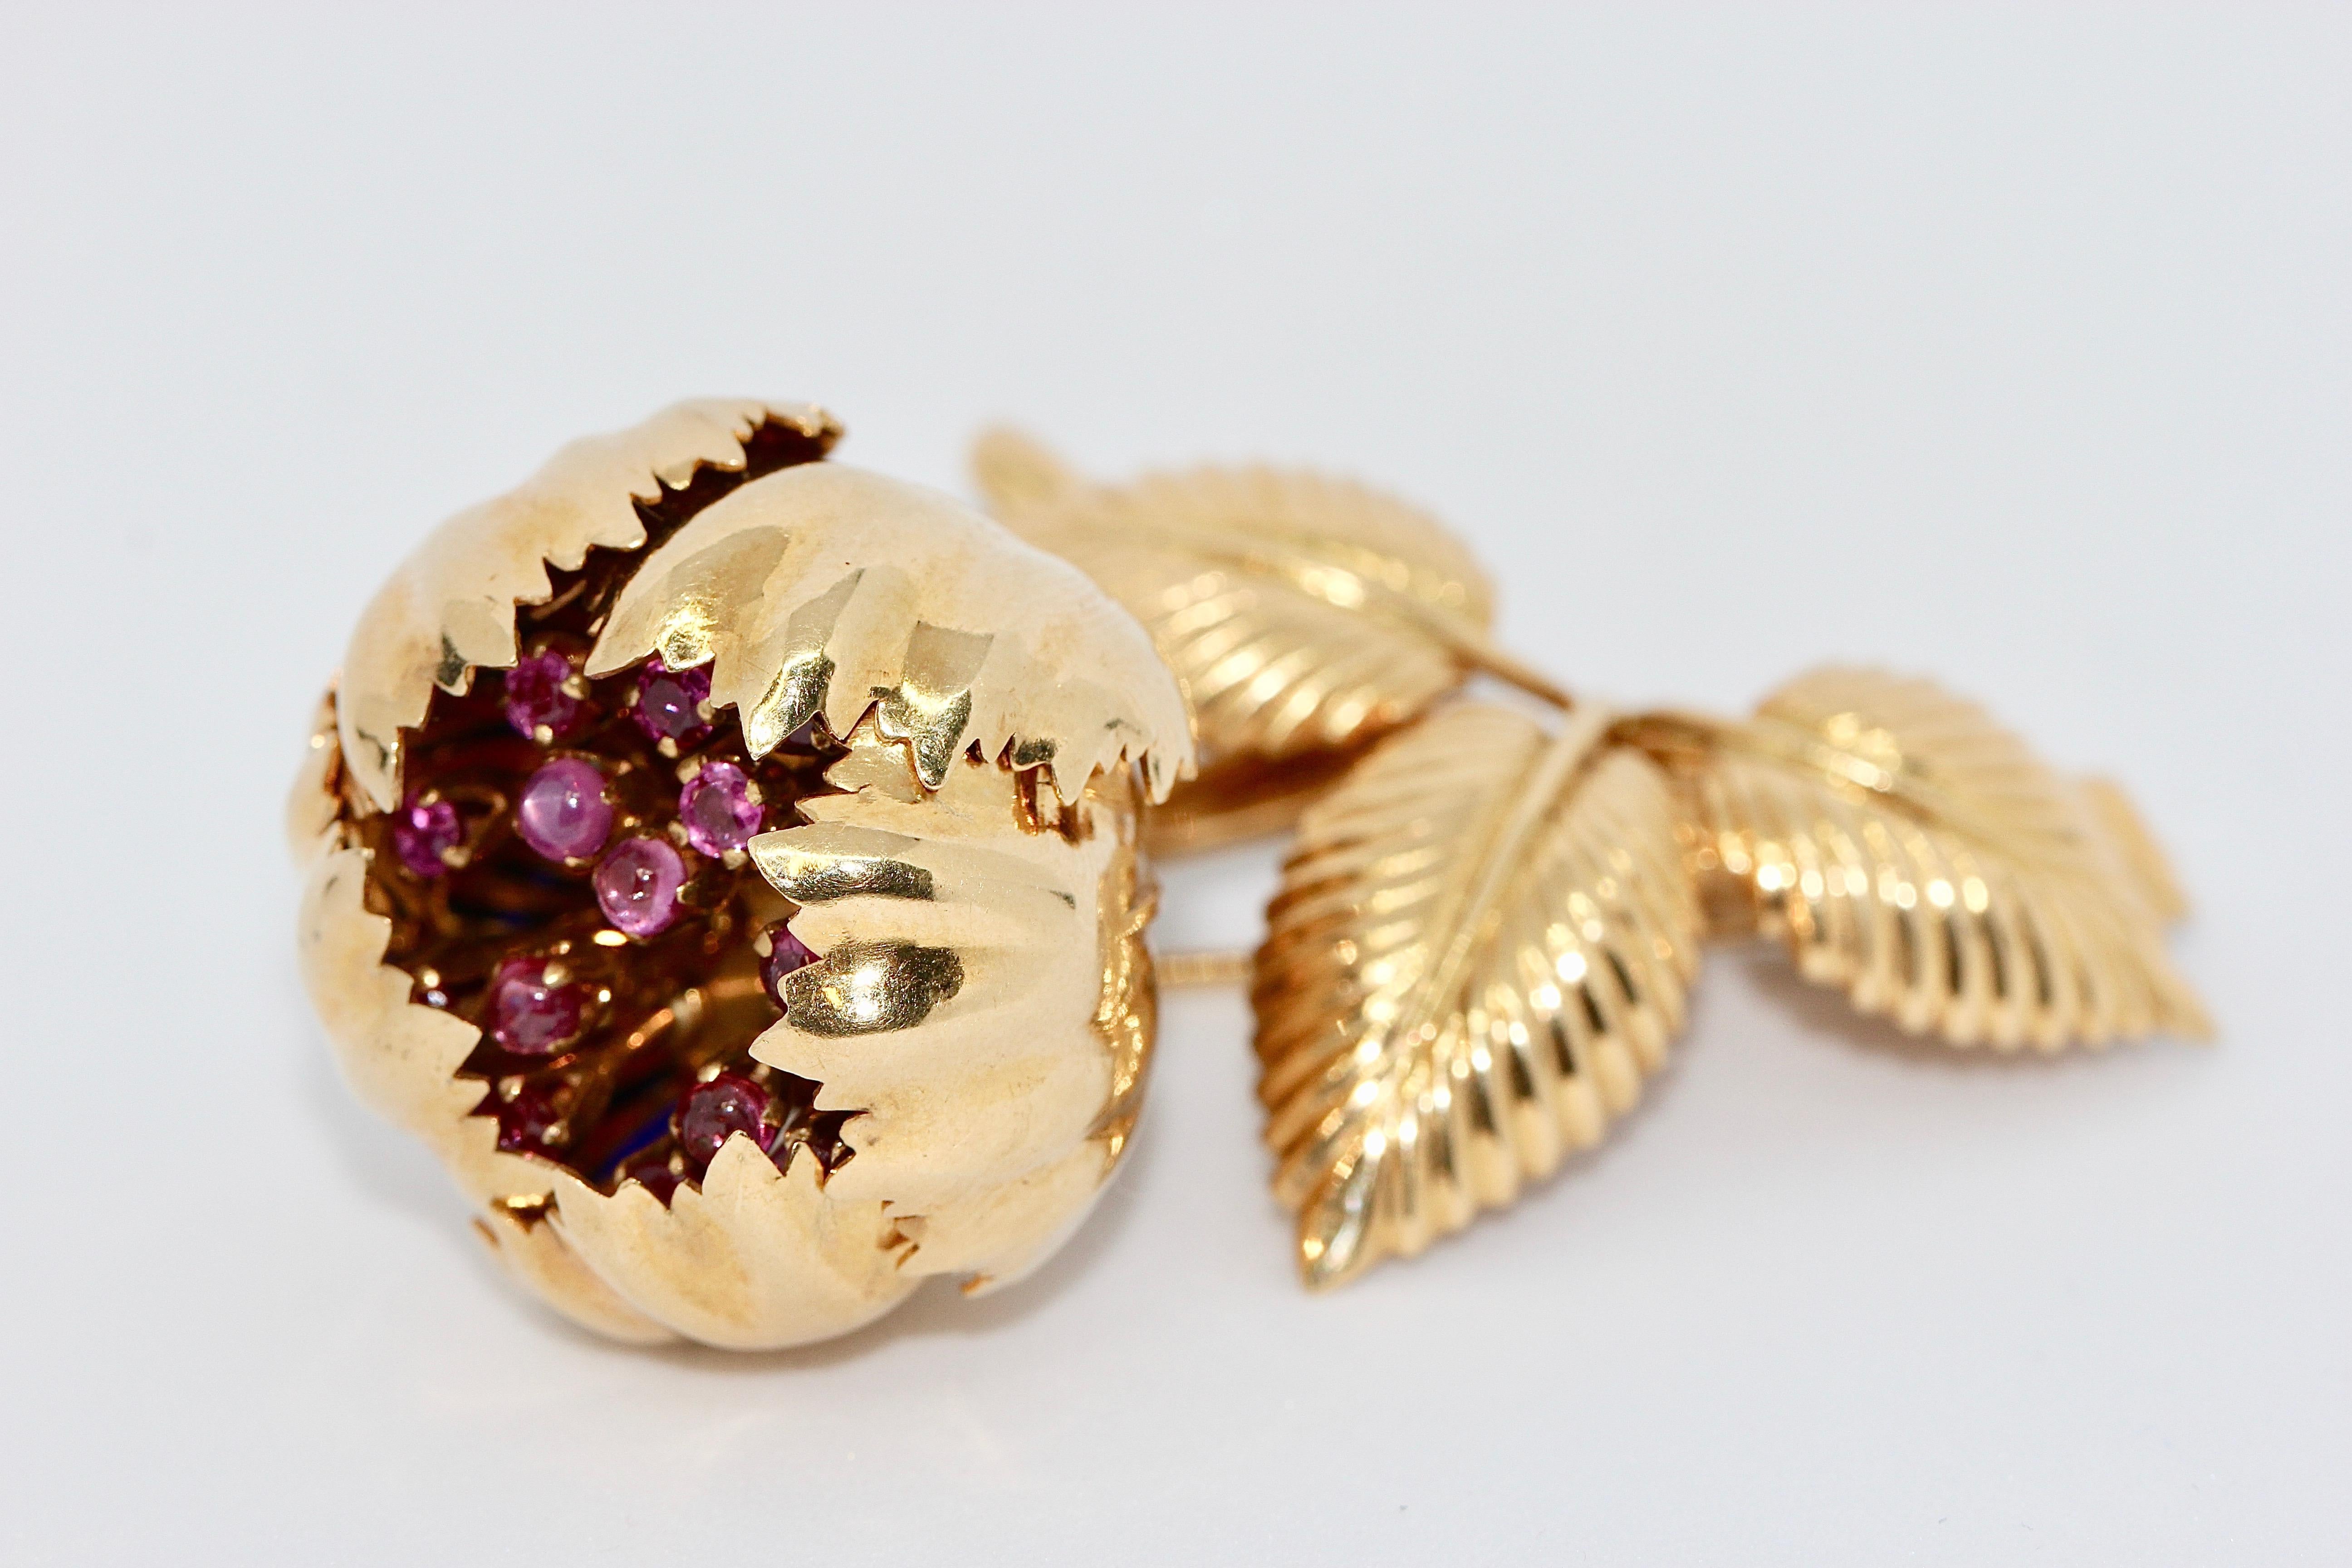 Enchanting, 18 Karat floral gold brooch with movable petals, rubies and enamel.

Extremely high quality goldsmith work. Probably a single piece. 

The five large petals can be opened and closed around the ruby stems.
Inside of the leaves with enamel